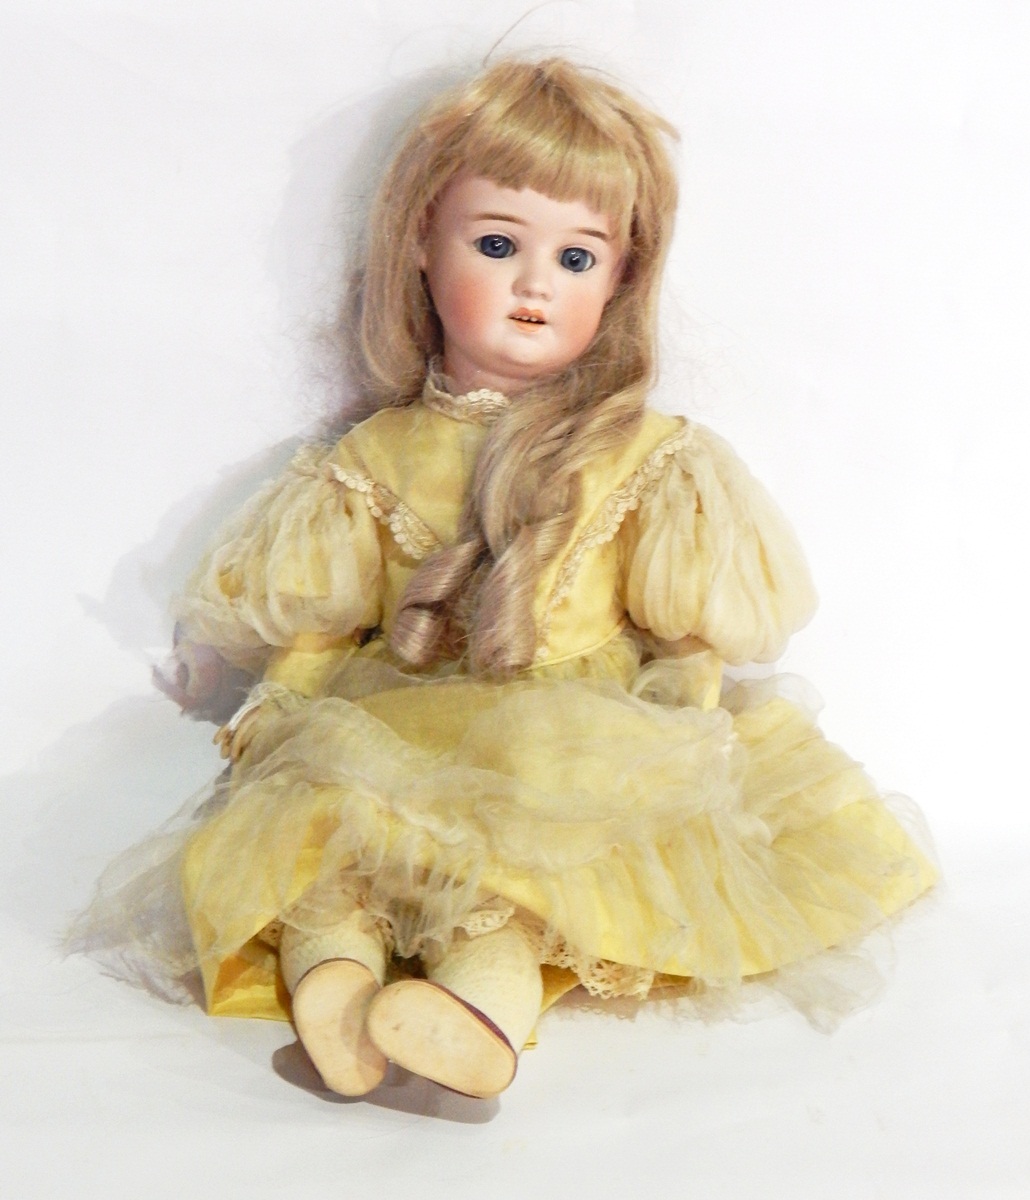 Schoenau & Hoffmeister bisque headed doll, sleep-eyes, open mouth, composition jointed body,